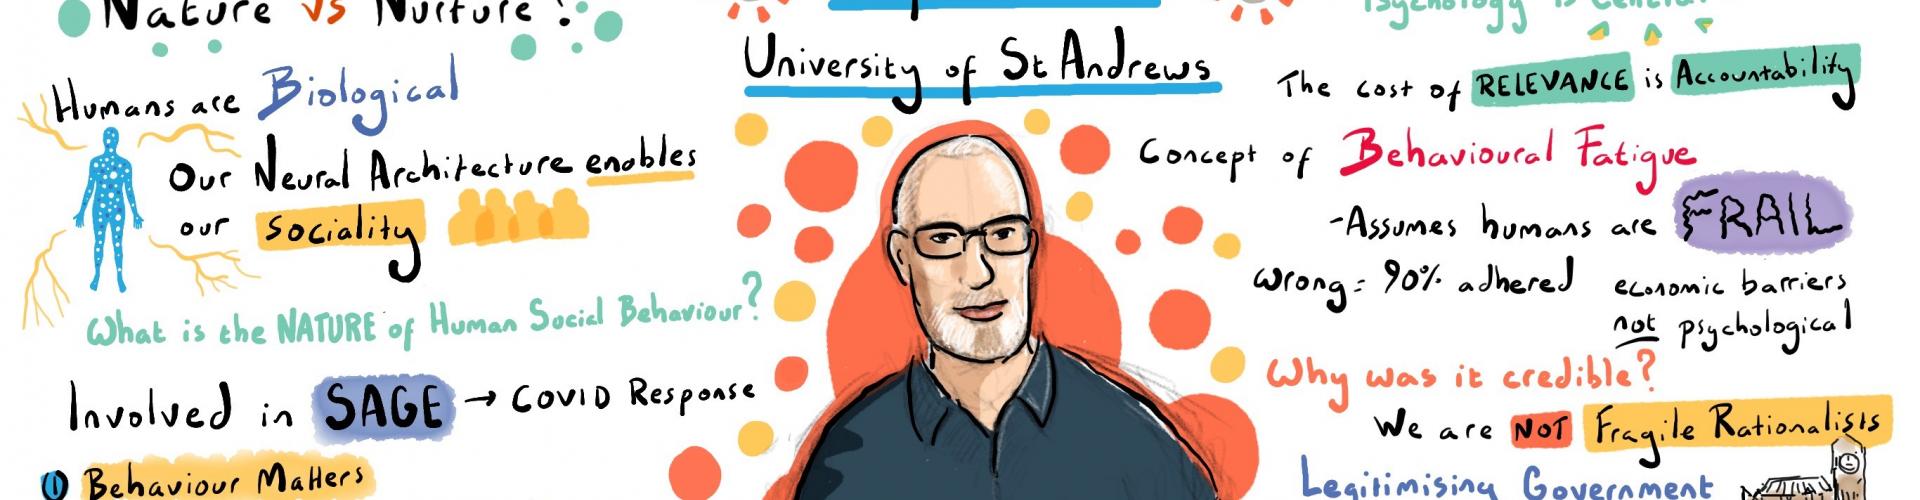 Illustration of Stephen Reicher and text from his talk